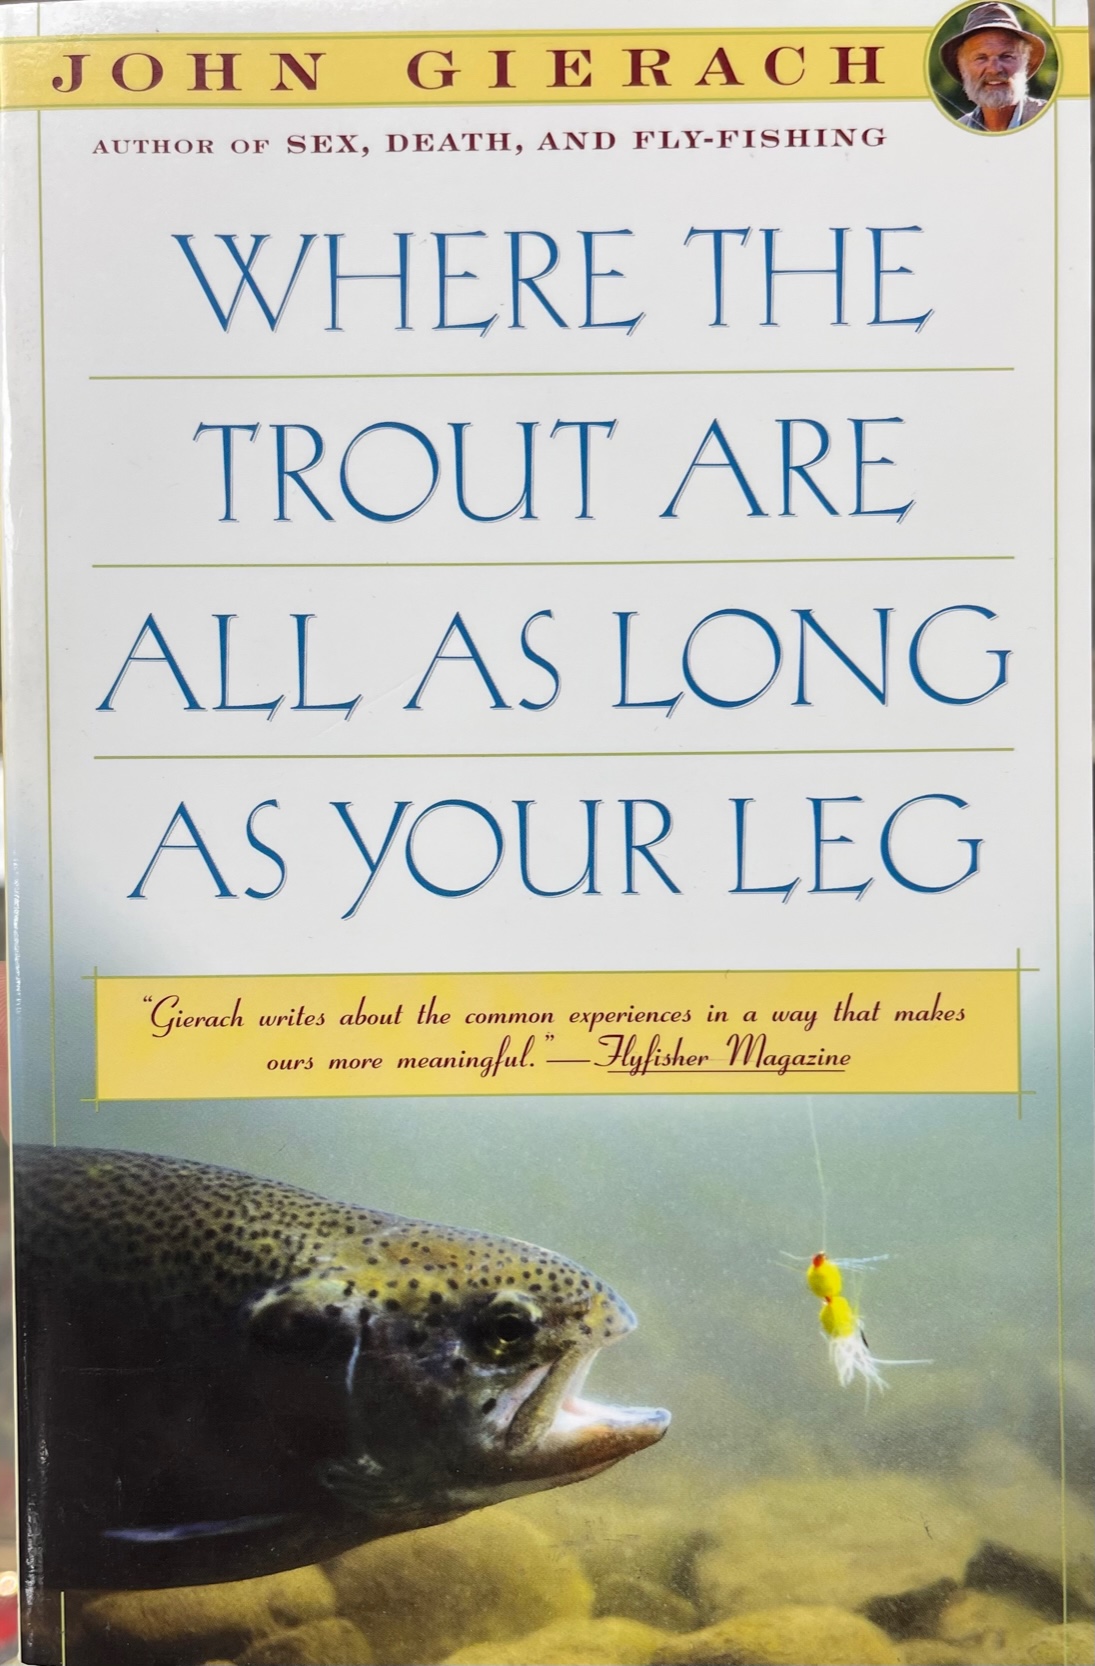 Where The Trout Are All As Long As Your Leg